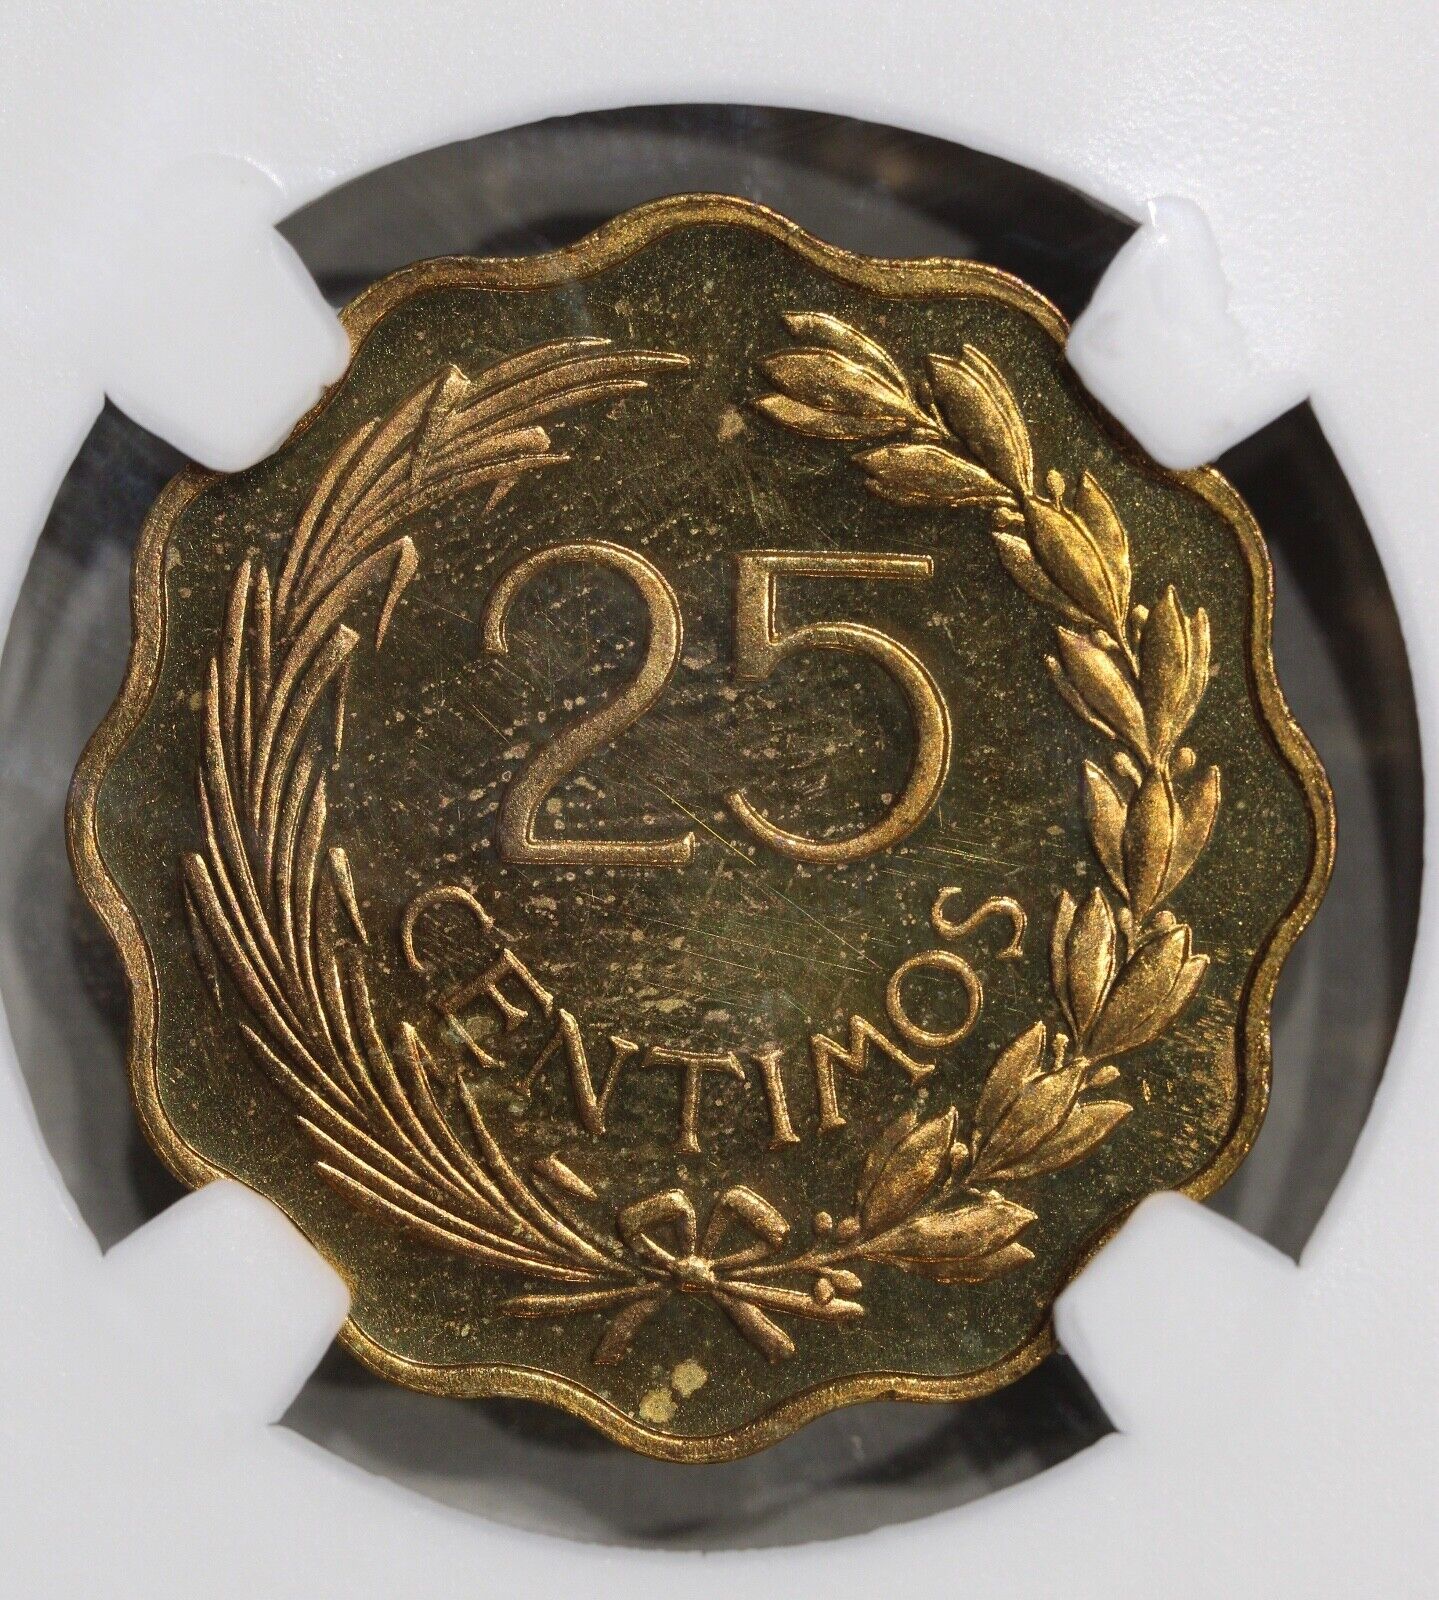 1953 Paraguay 25 Centavos EX-Whittier Pattern Proof Nickel Brass Coin NGC PF 64